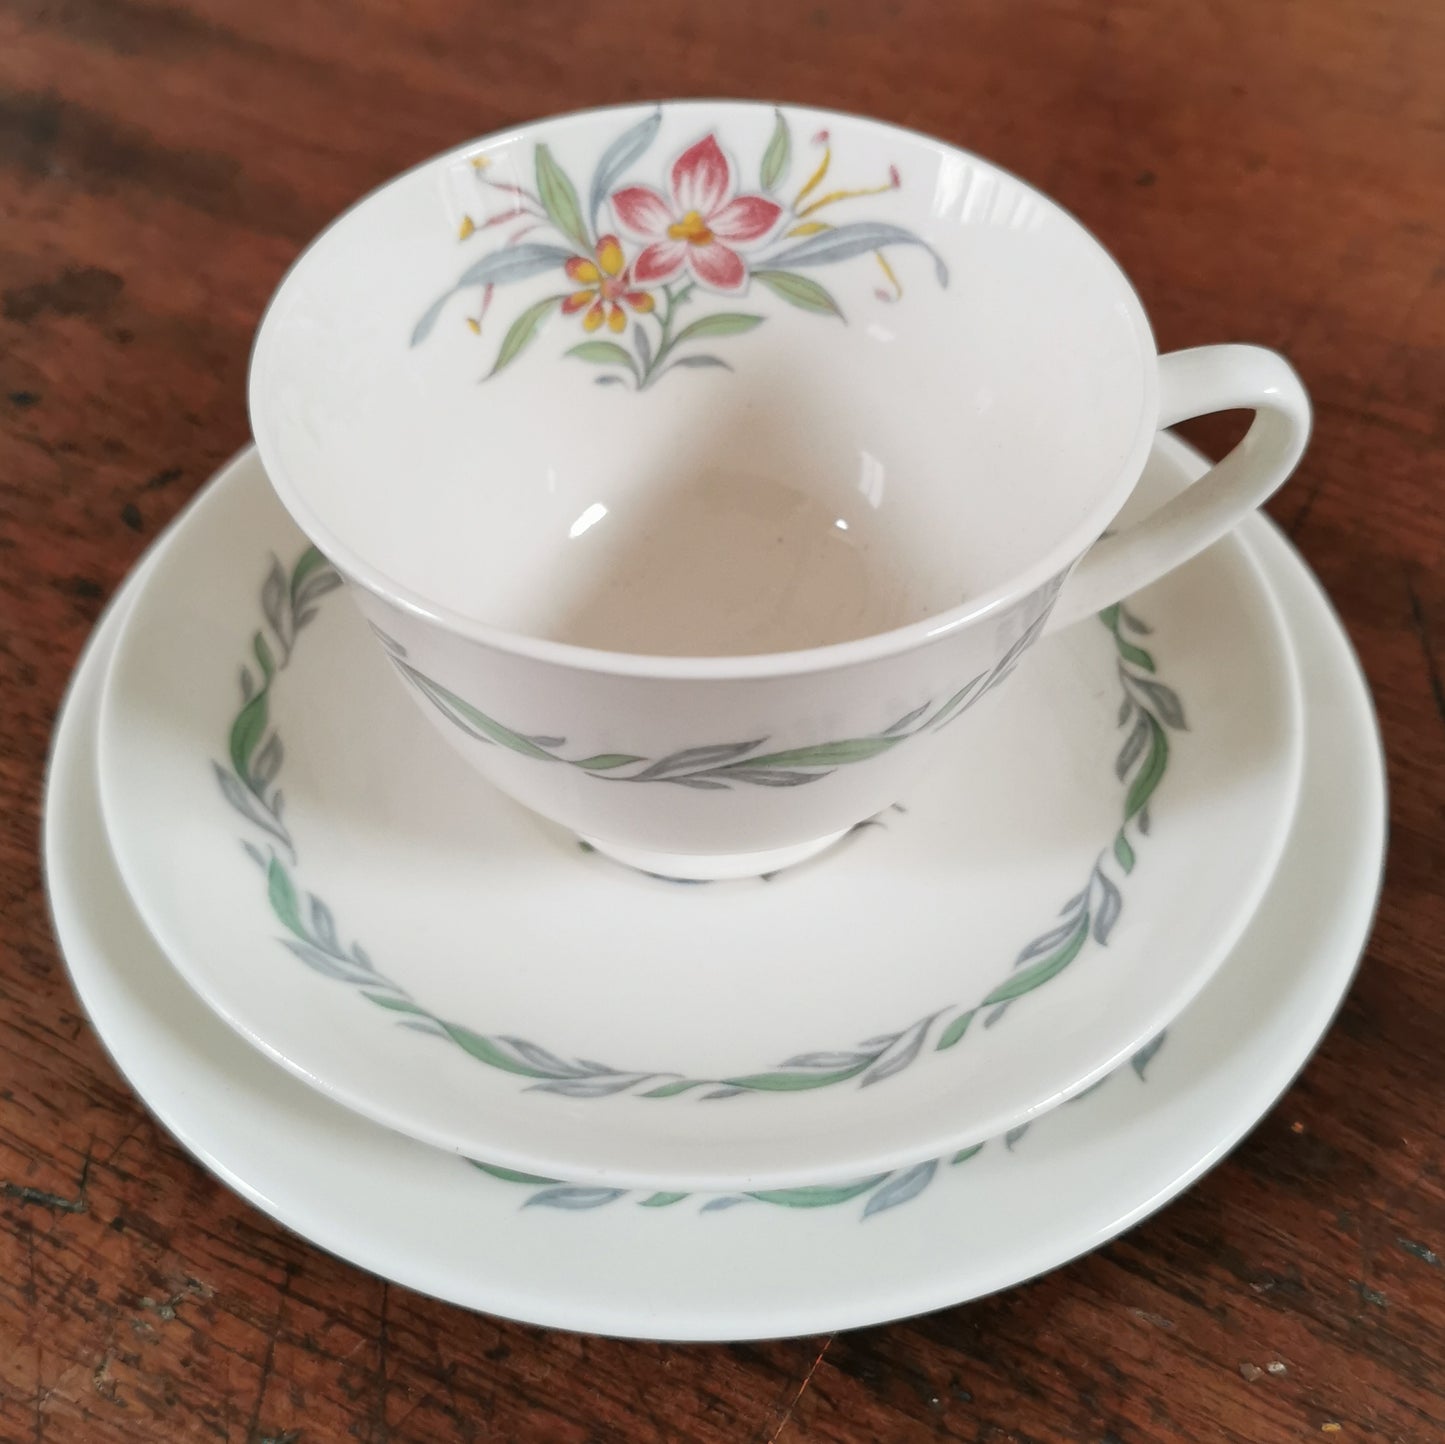 Royal Doulton Floral China Fairfield D6339 Teacup, Saucer and Side Plate Trio